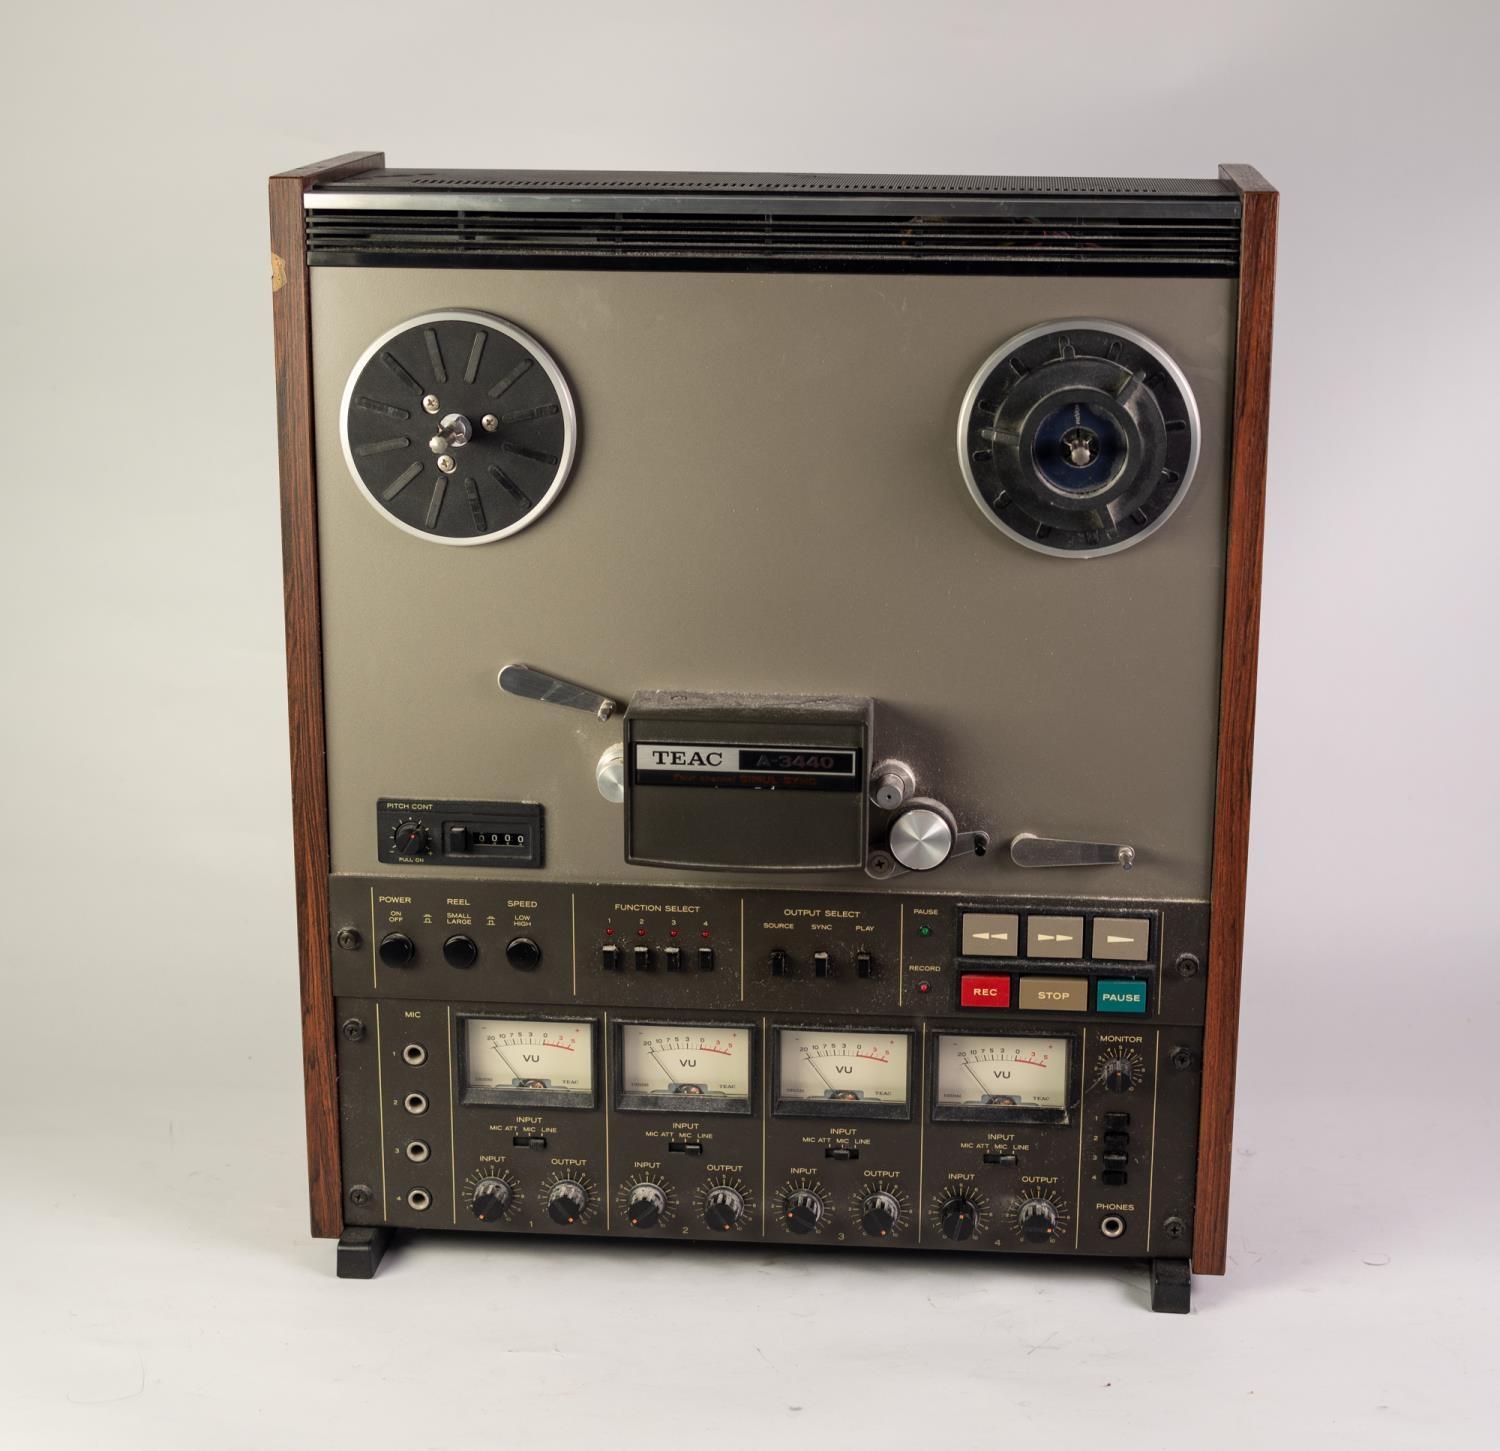 TEAC A-3440, FOUR TRACK/FOUR CHANNEL, SIMUL-SYNC, REEL TO REEL TAPE DECK, serial no 31410, made in